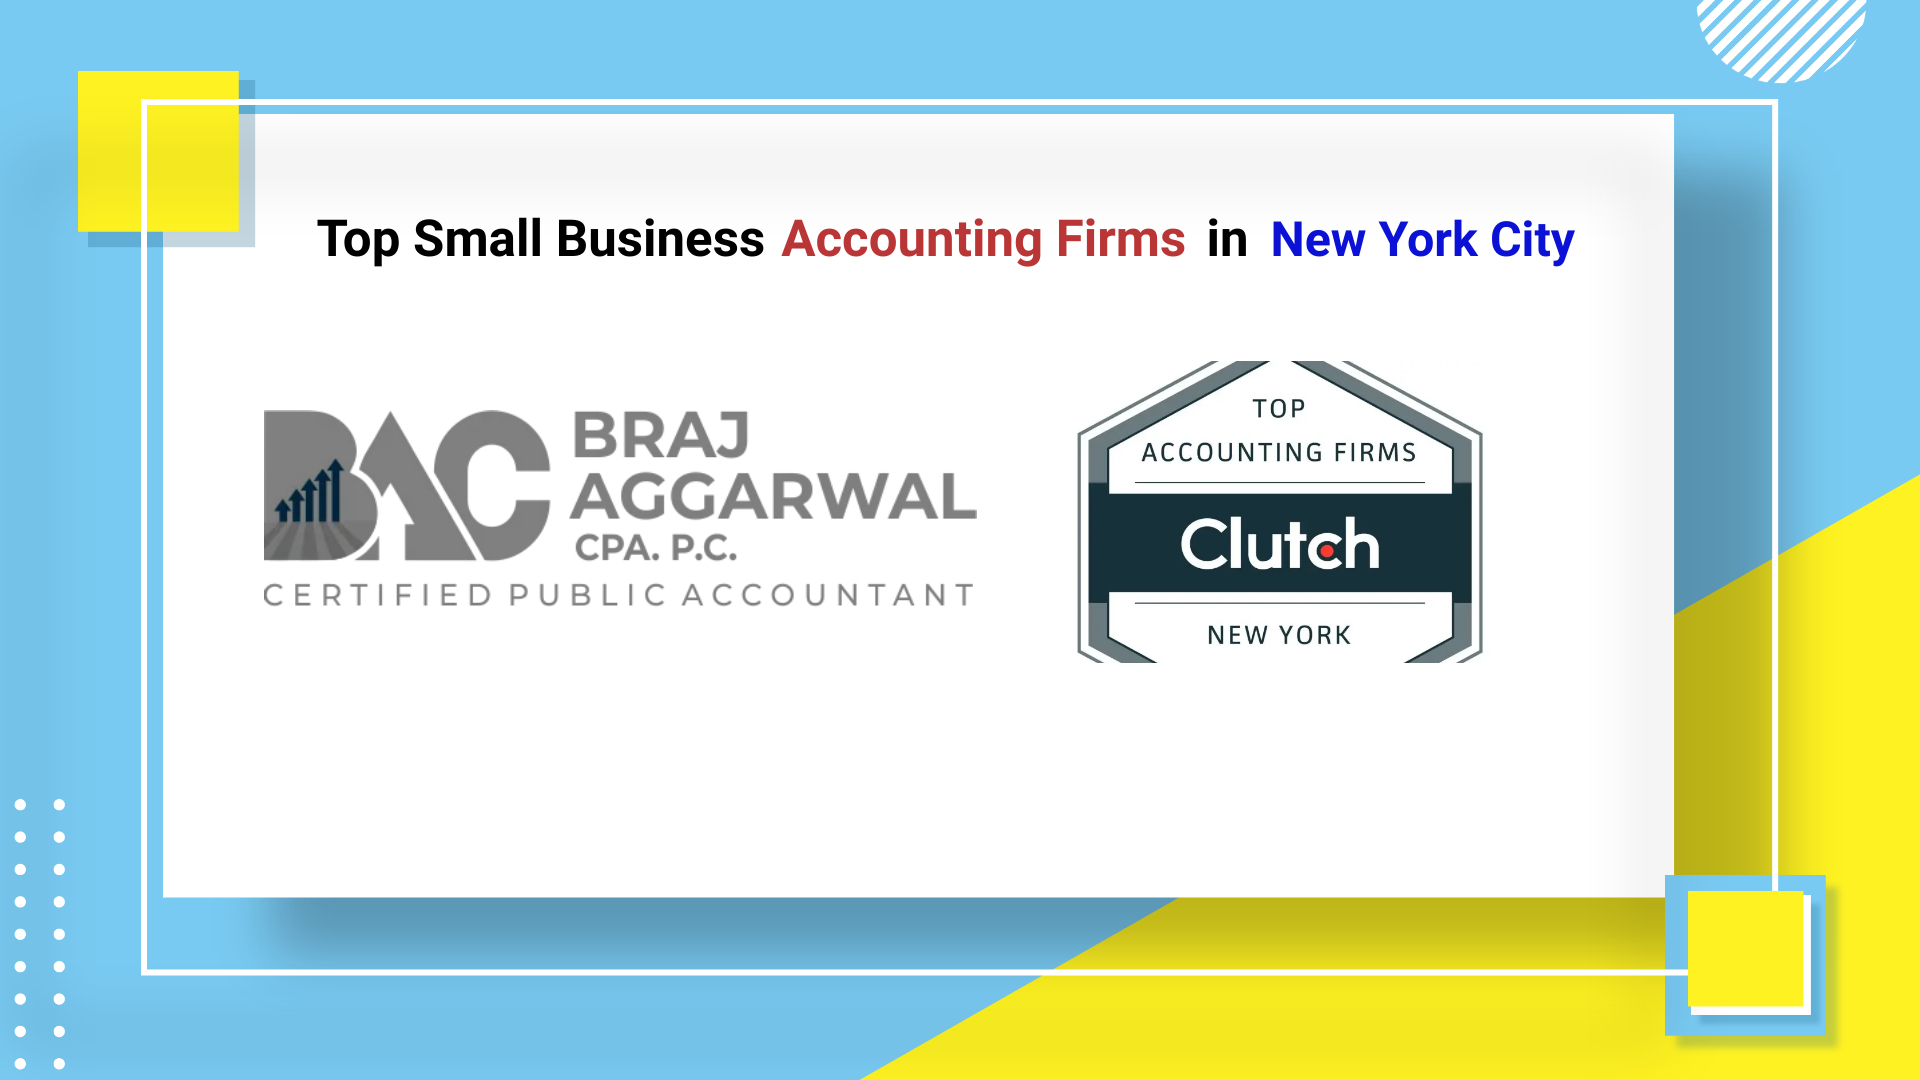 Braj Aggarwal, CPA, P.C Accounting and Taxation Services are at The Top of the Industry